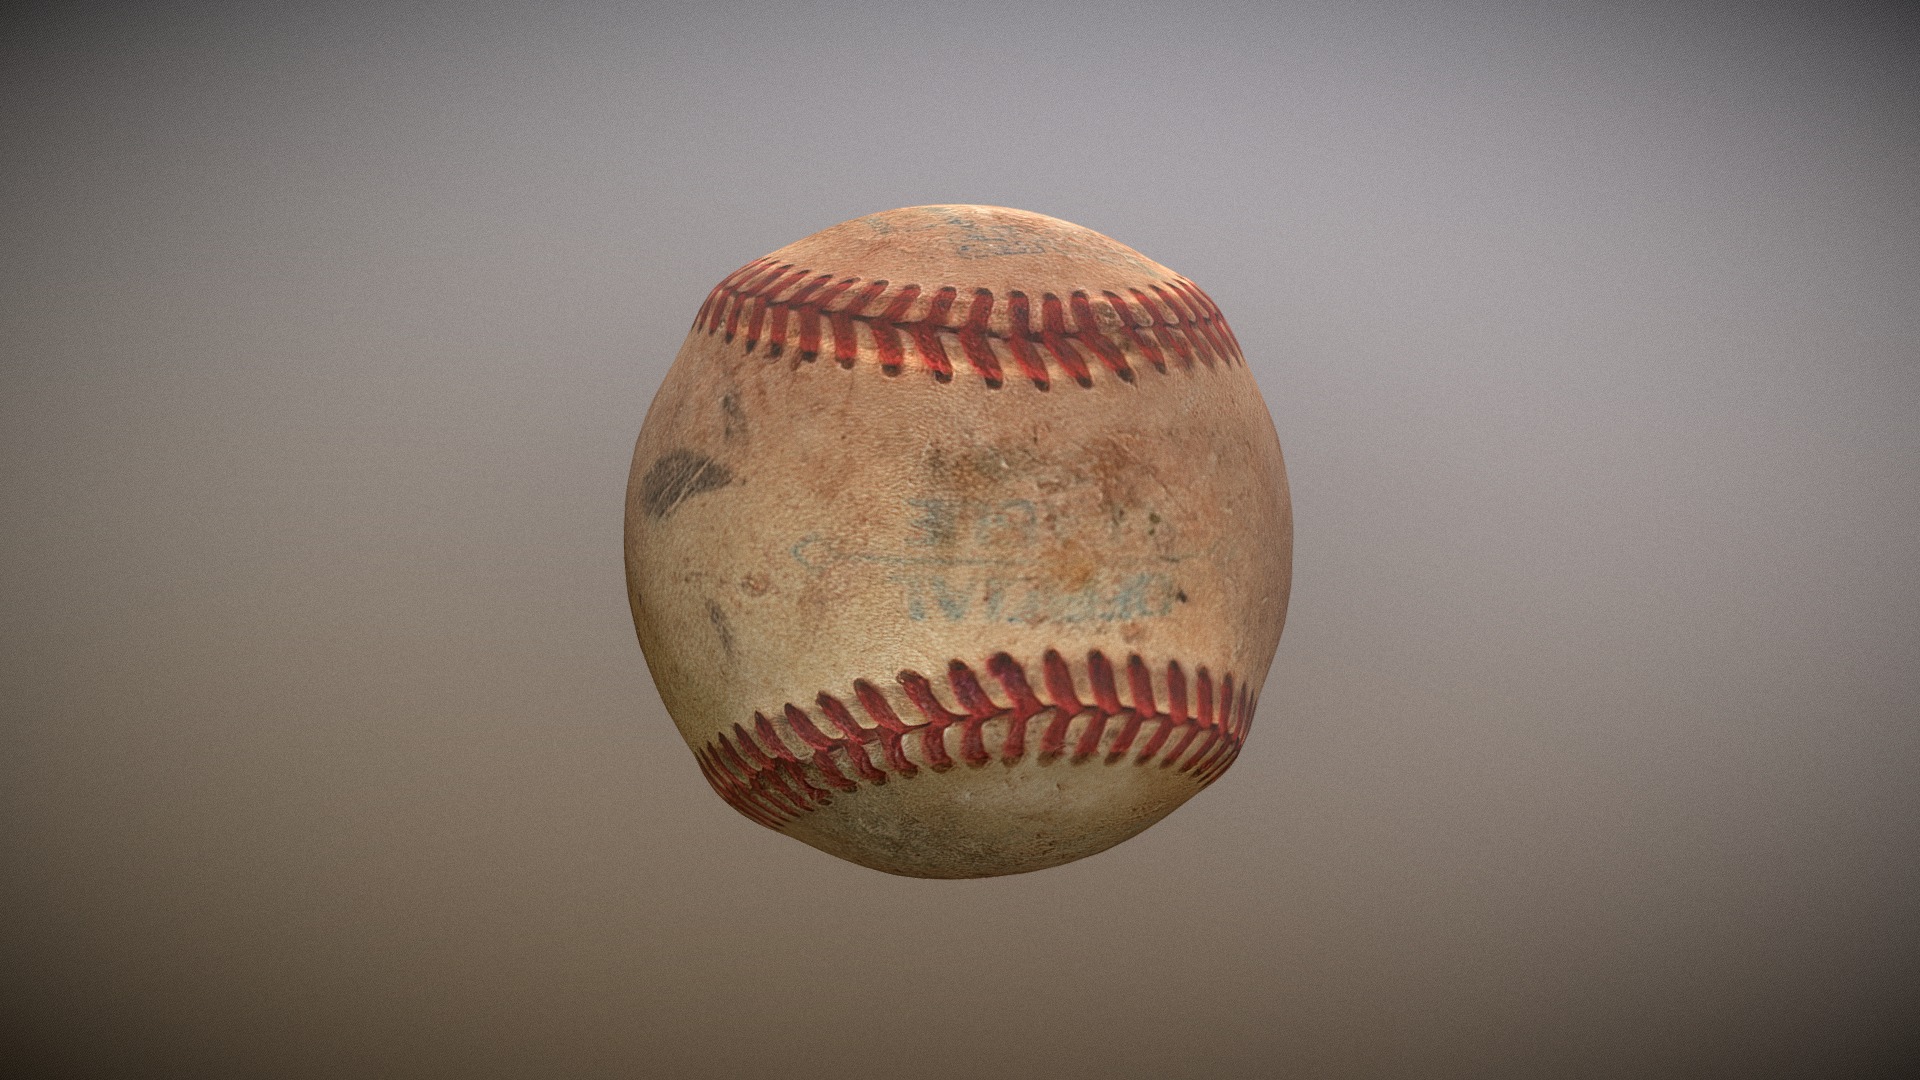 3D model A Well Loved Baseball - This is a 3D model of the A Well Loved Baseball. The 3D model is about a ball with a red and white design.